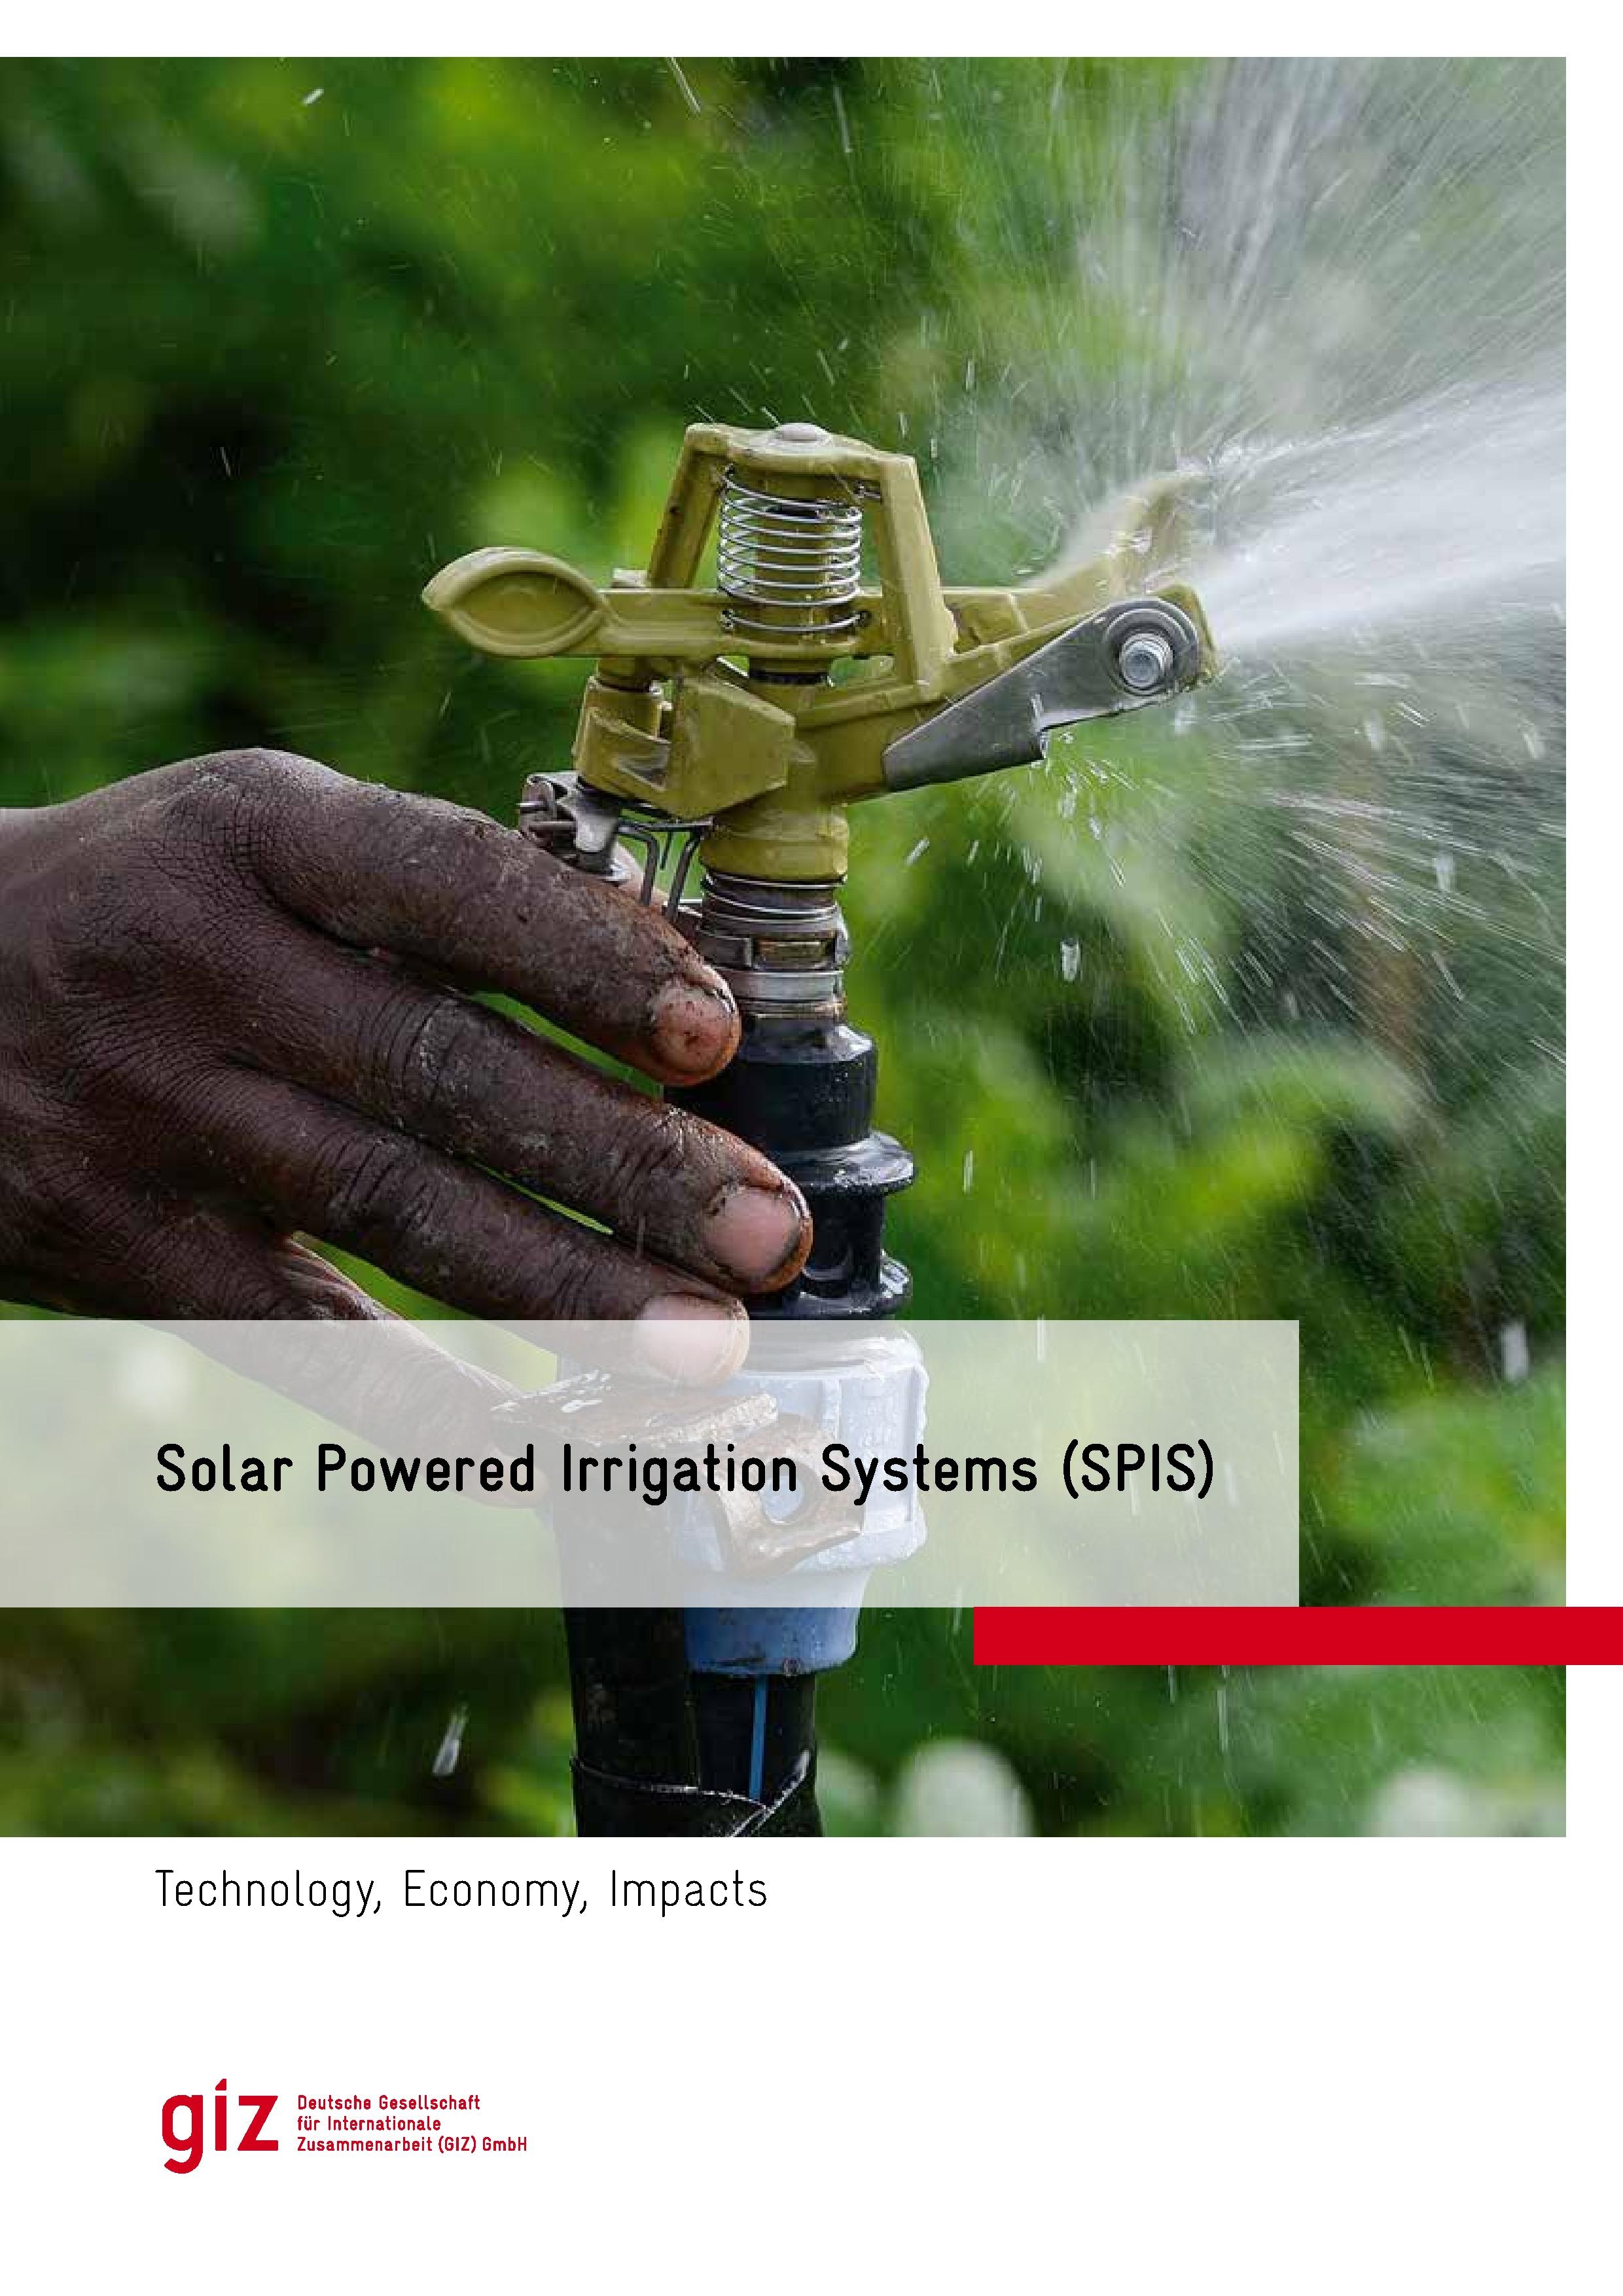 Solar Powered Irrigation Systems (SPIS) - Technology, Economy, Impacts